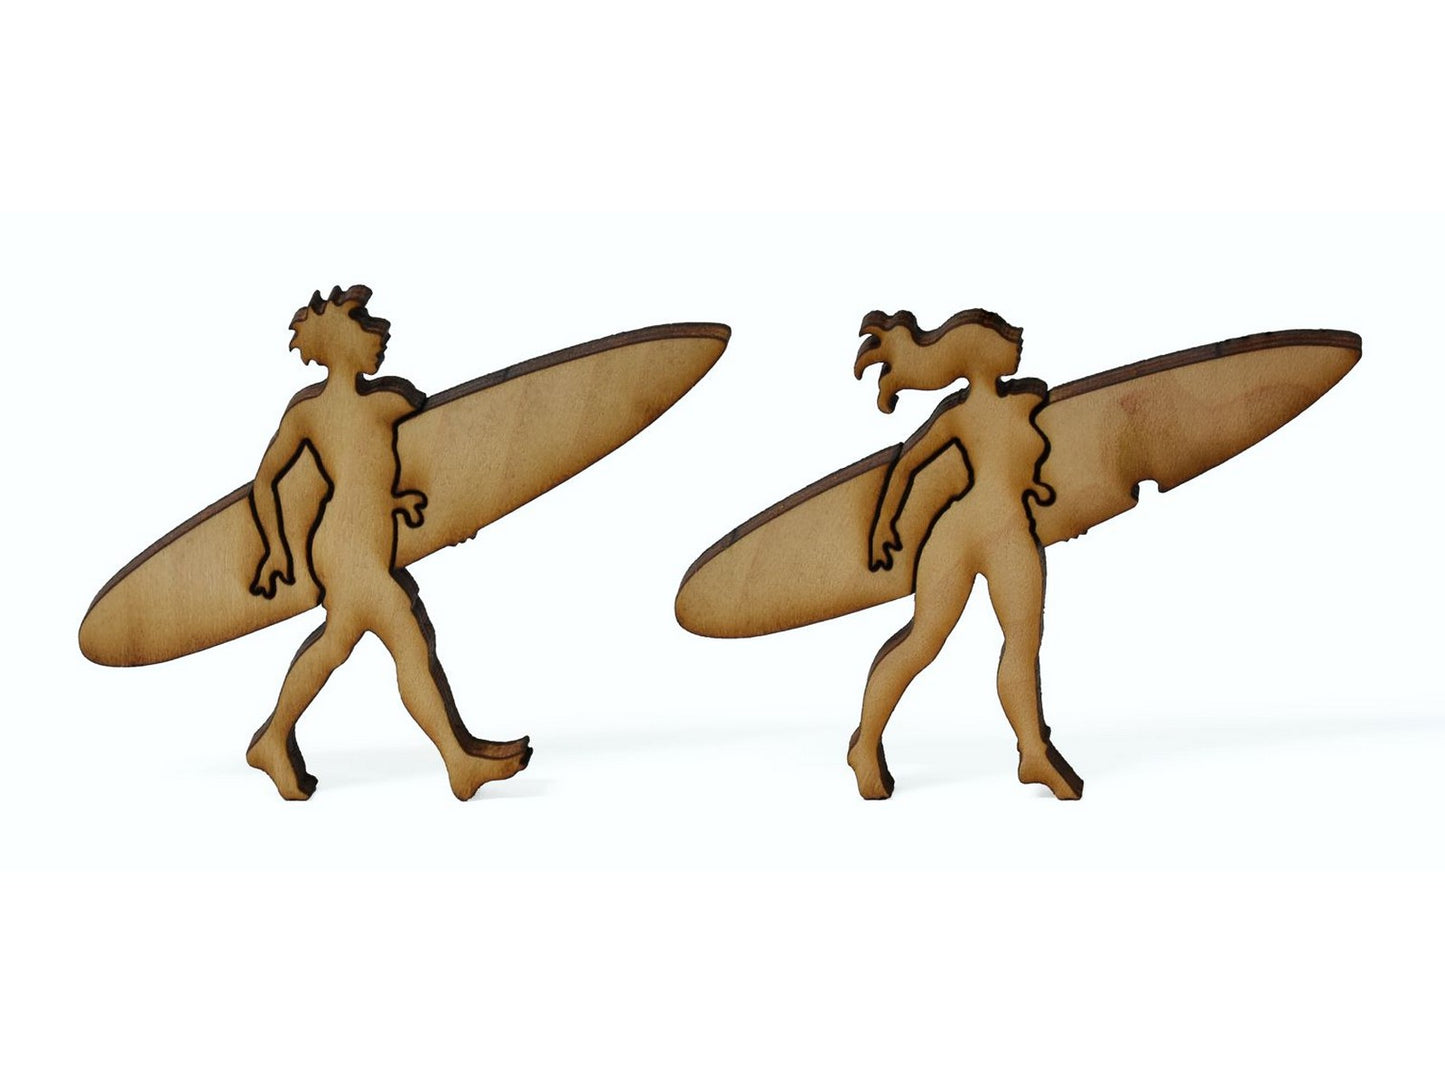 A closeup of pieces showing two surfers with their surfboards.